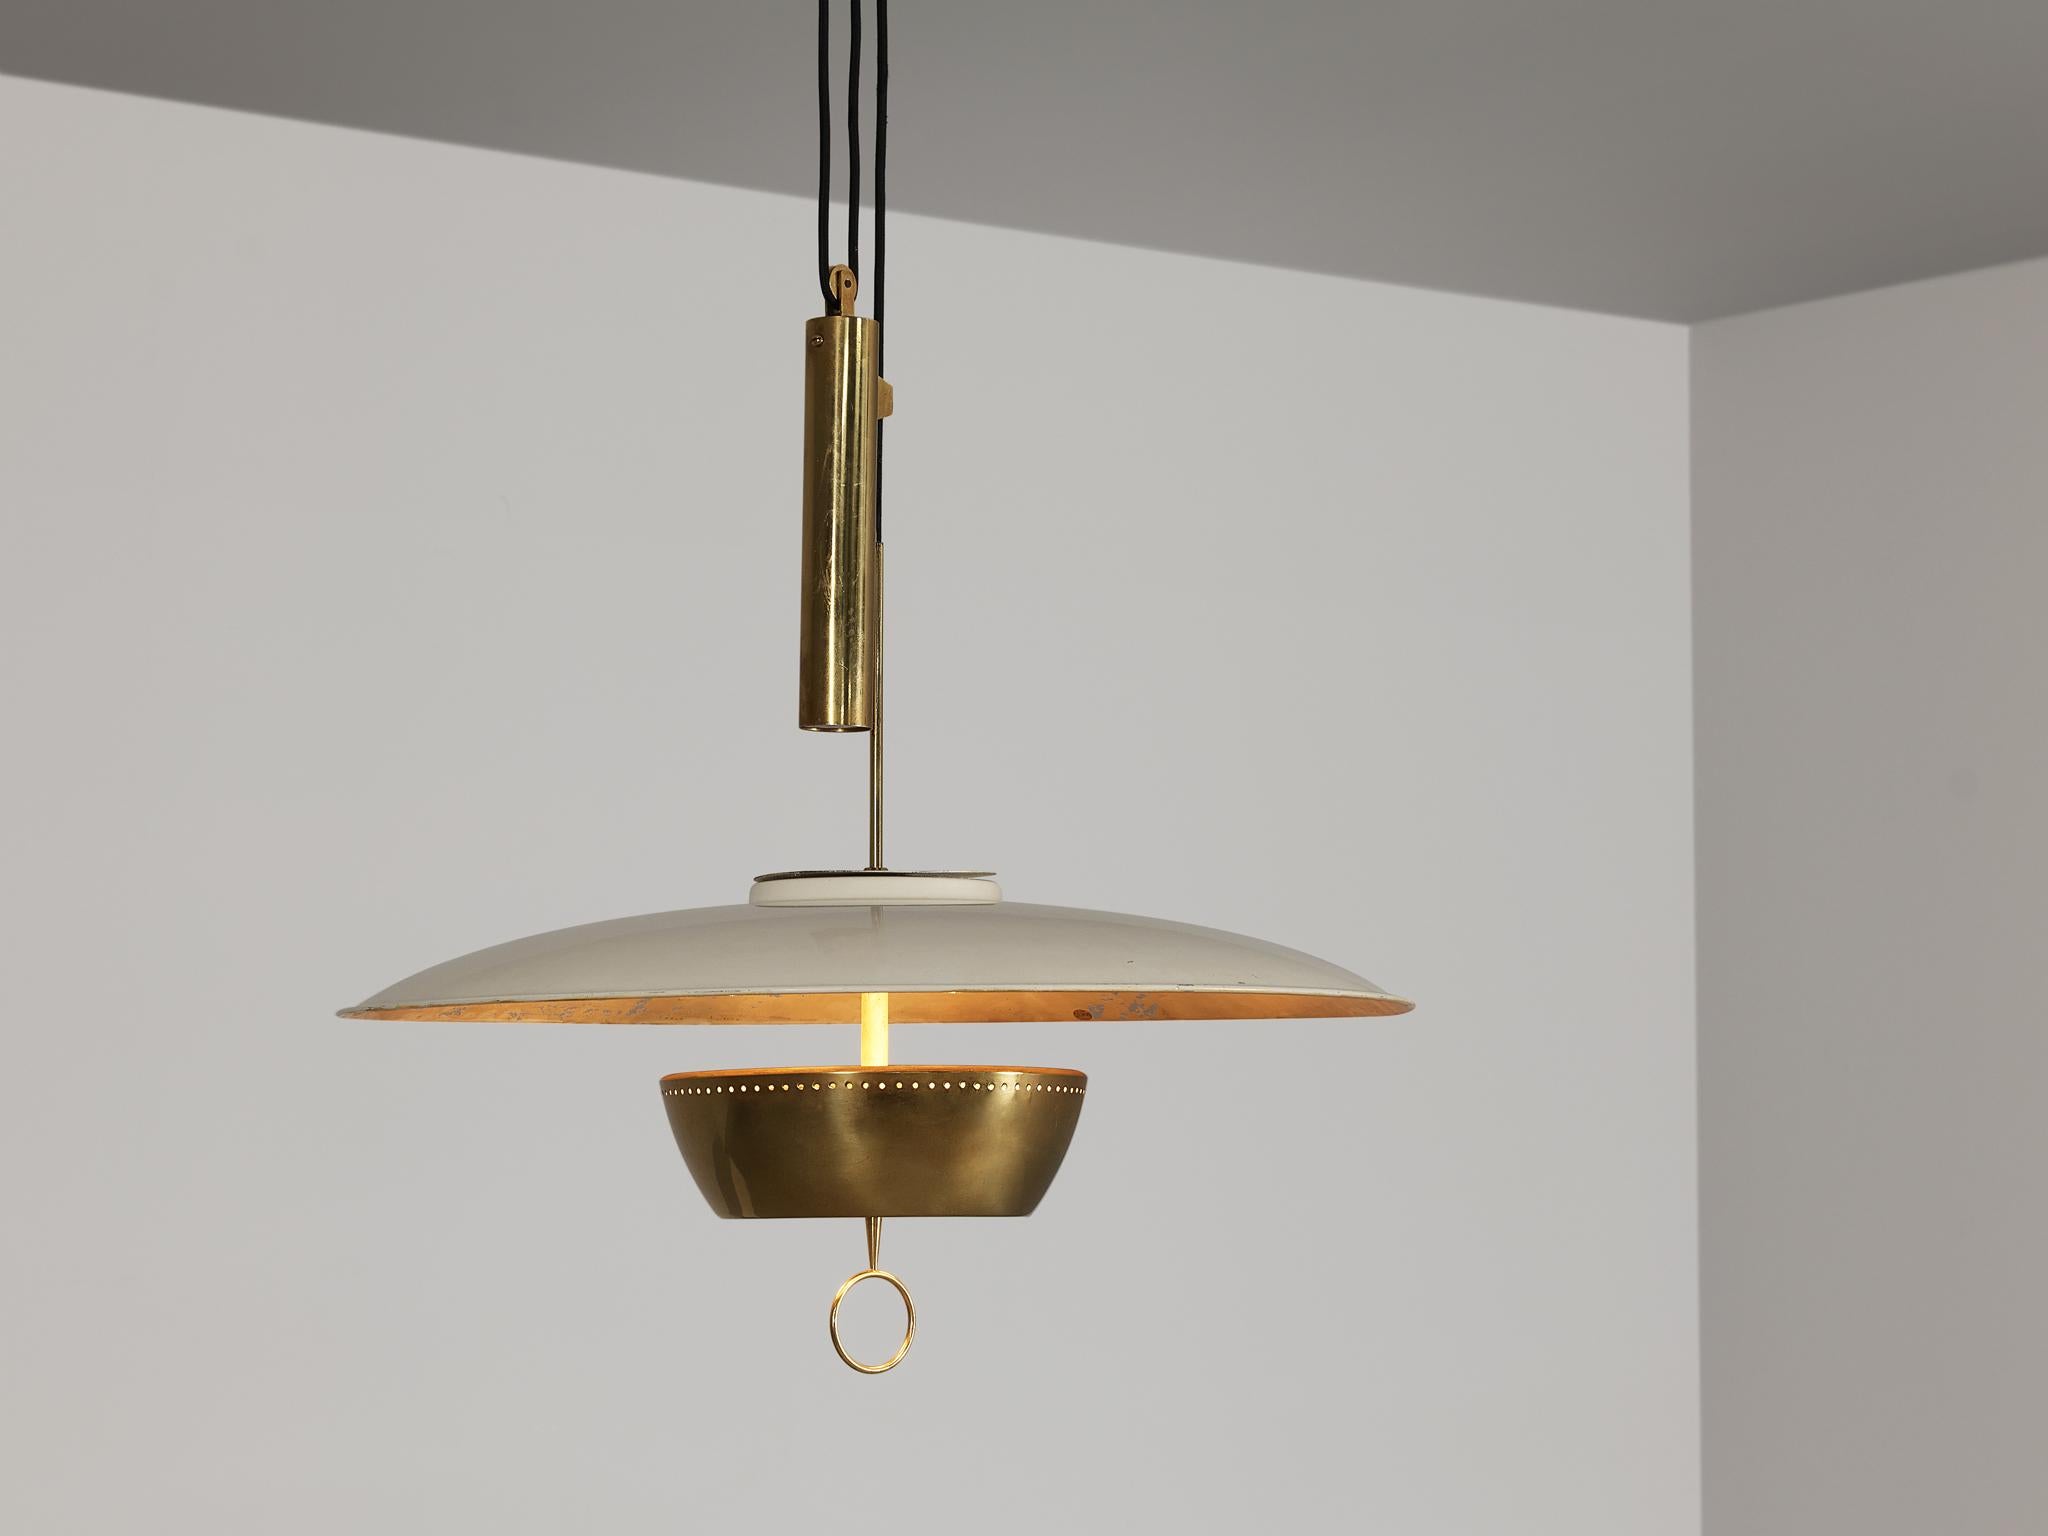 Gaetano Scolari for Stilnovo, ceiling light, model A5011, coated aluminum, brass, glass, Italy, 1950

Elegant, dynamic, and modern pendant created by Scolari for Stilnovo. This captivating pendant is adjustable in height, thanks to the presence of a